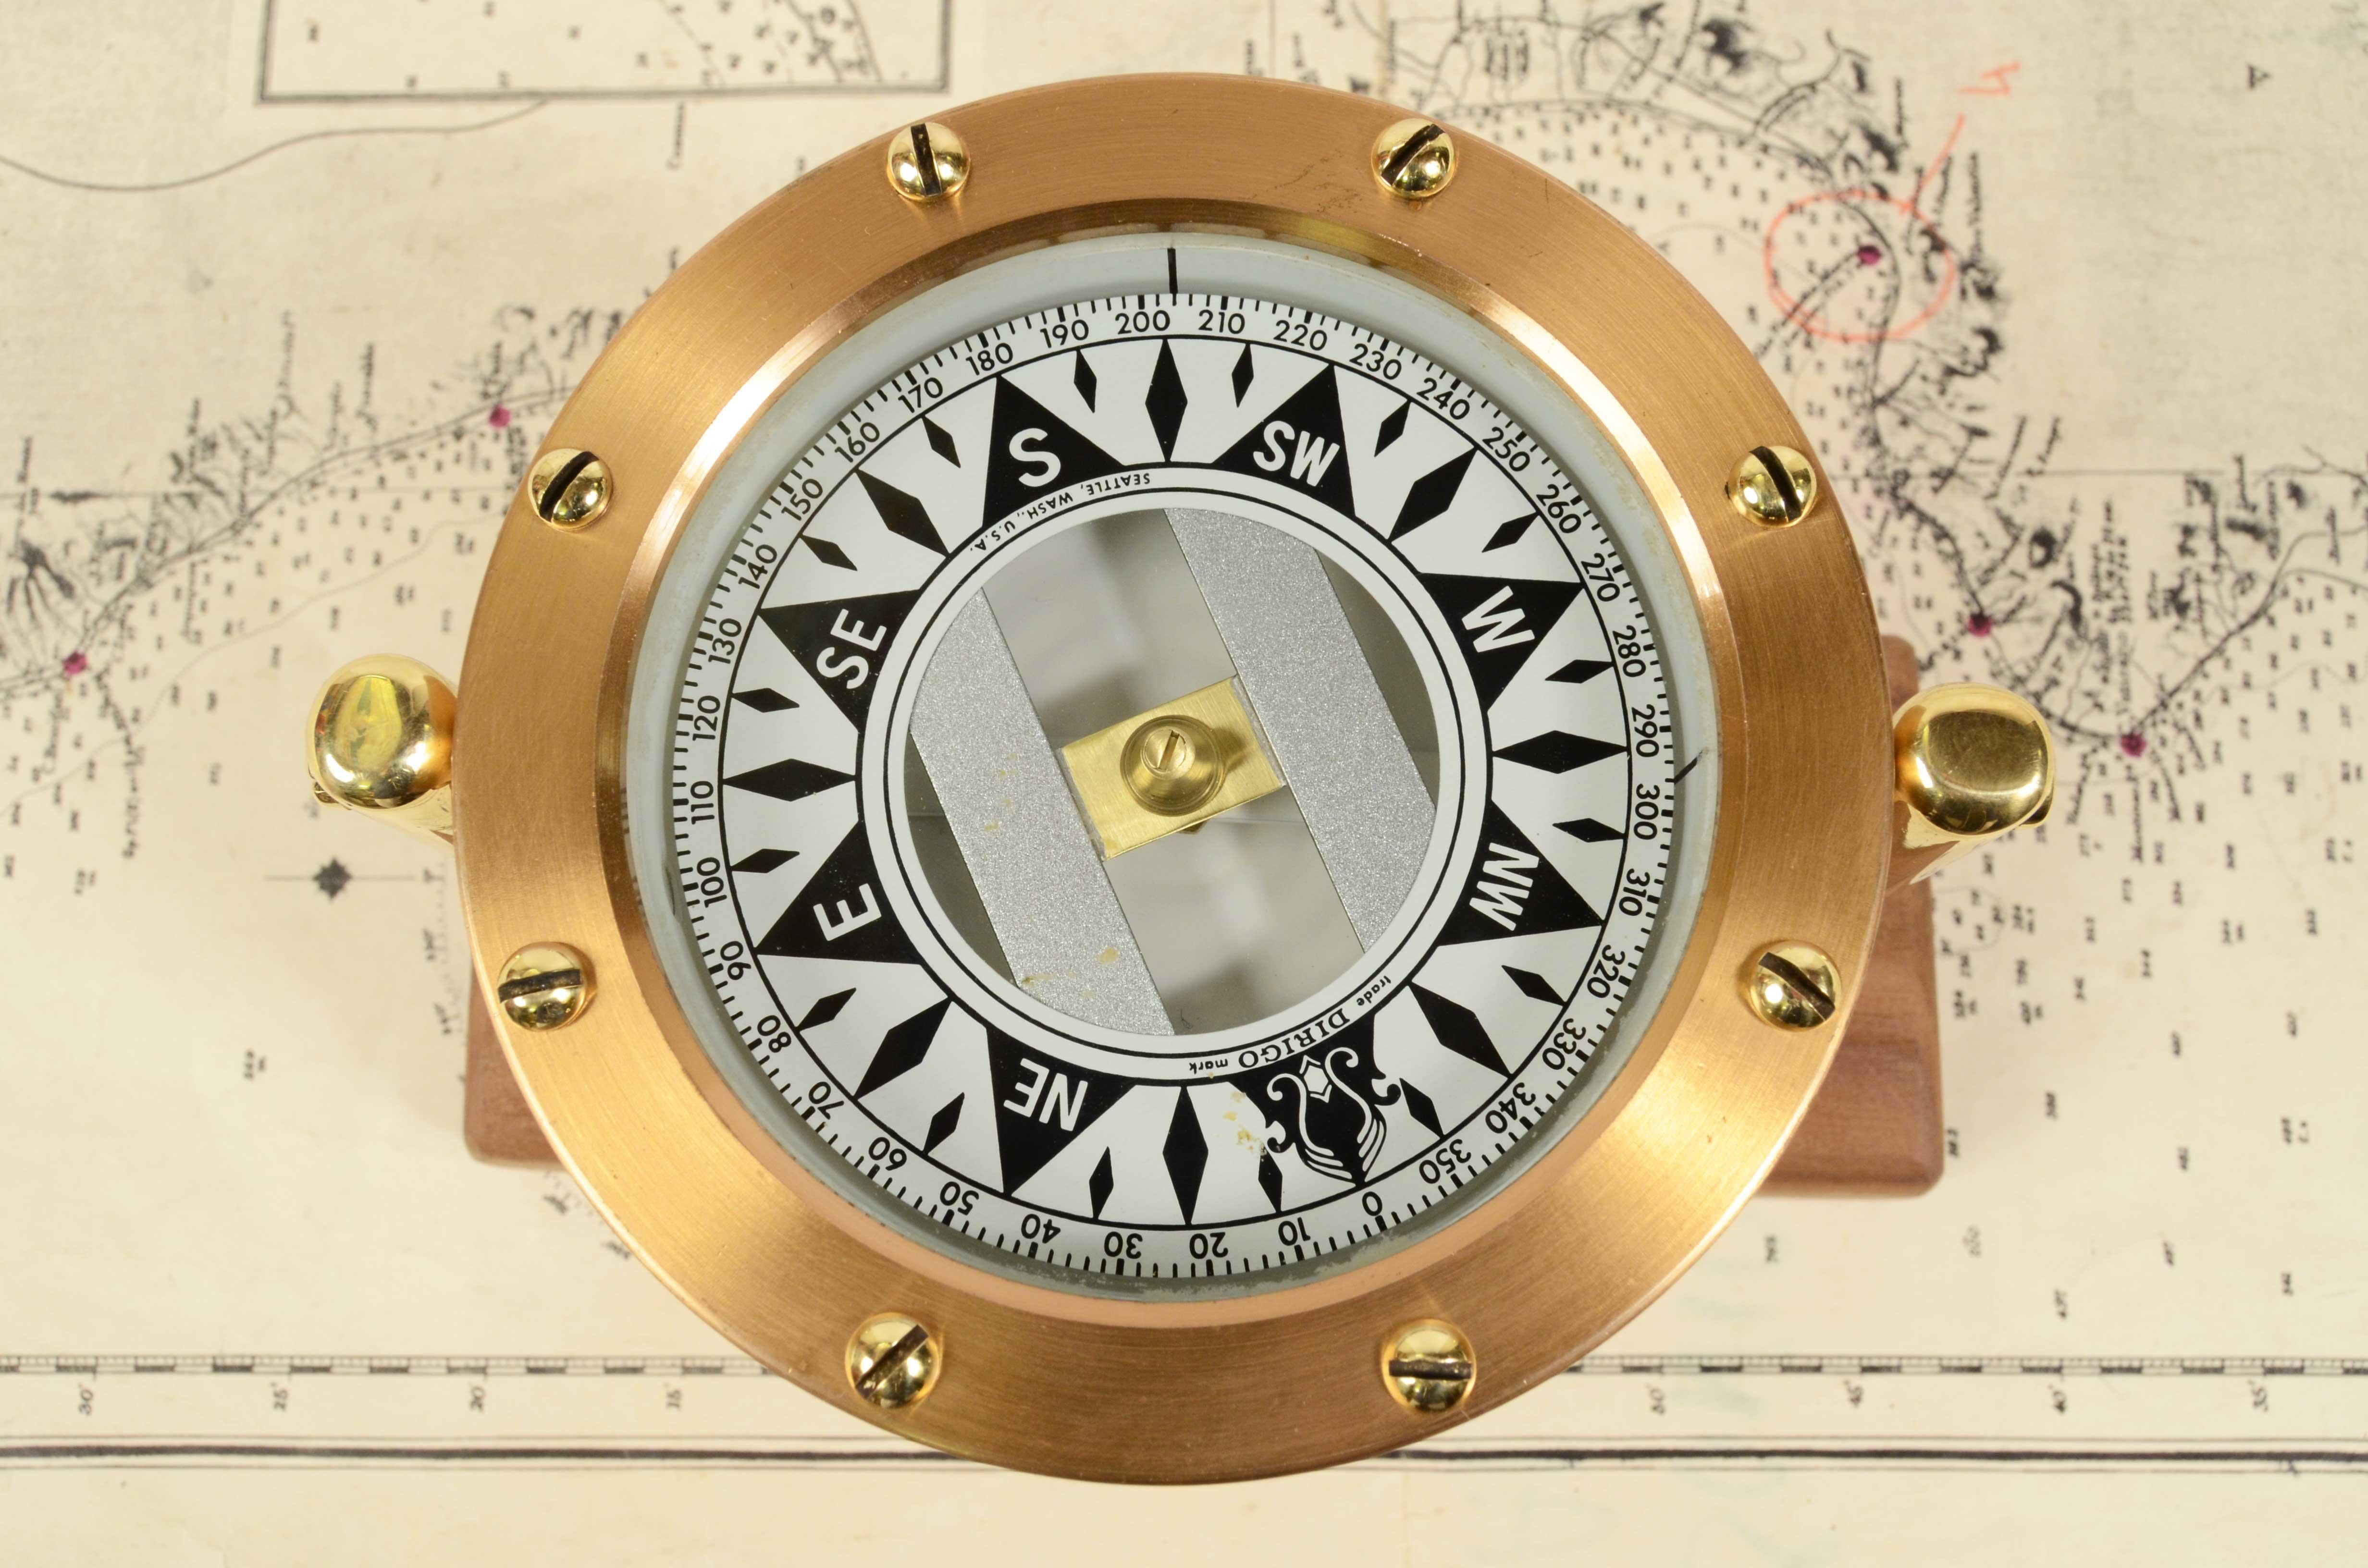 Liquid nautical compass on cardan joint signed DIRIGO Seattle Wash from the early 1930s, eight-wind rose complete with protractor circle mounted on a wooden board and made-to-measure ototne. The compass is made up of a cylindrical vessel in brass